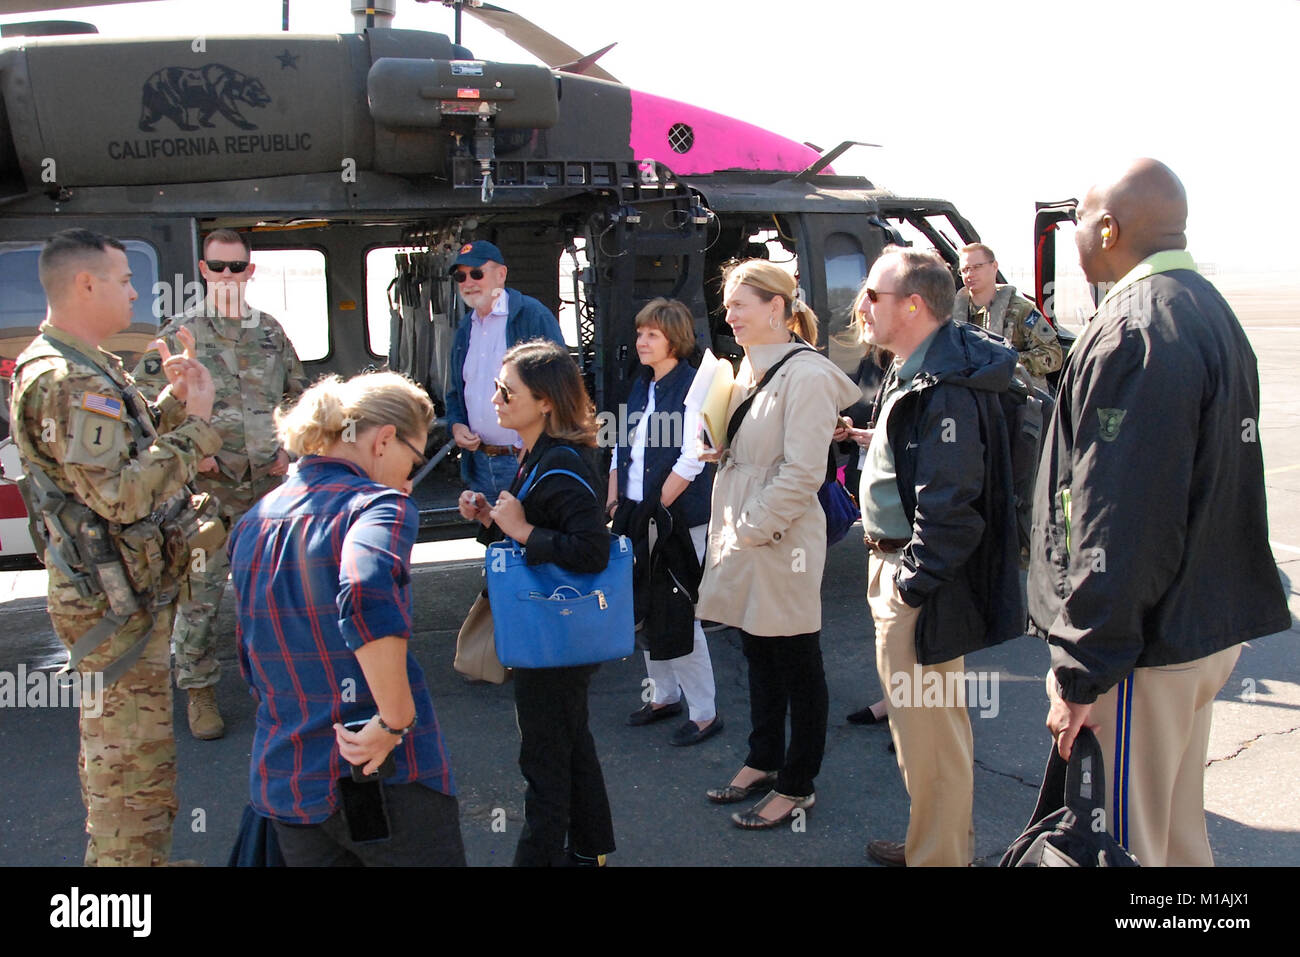 The California National Guard's Adjutant General Maj. Gen. David S. Baldwin joined Gov. Jerry Brown, U.S. Sen. Diane Feinstein, and U.S. Sen. Kamala Harris for an air and ground survey of Northern California fires in and around Santa Rosa, California, Oct. 14, 2017. Joining them in assessing the damage and addressing the community were CAL FIRE Director Chief Ken Pimlott, California Office of Emergency Services Director Mark Ghilarducci, and representatives from the California Highway Patrol, the U.S. Forest Service, and local and regional emergency-response agencies (Army National Guard photo Stock Photo